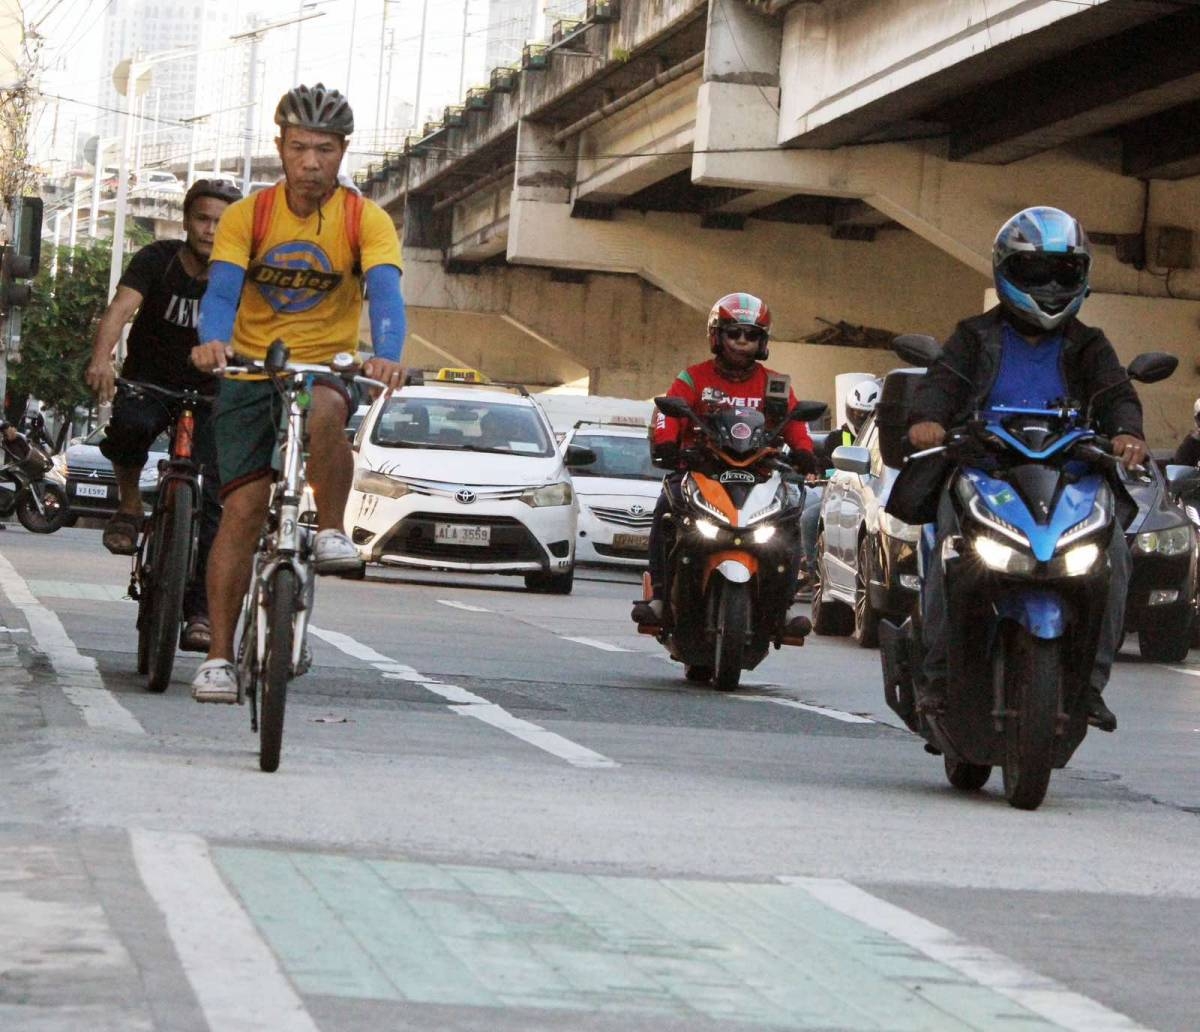 Bicycle riders are seen at the EDSA bike lane in Quezon City on Wednesday, April 24, 2024. The Metropolitan Manila Development Authority (MMDA), along with the Department of Transportation (DOTr), is considering removing the bicycle lane on EDSA to explore the possibility of building a dedicated motorcycle lane. According to the MMDA, only 1,500 cyclists use the bike lane daily compared to 170,000 motorcycles going through EDSA per day.  PHOTOS BY ISMAEL DE JUAN